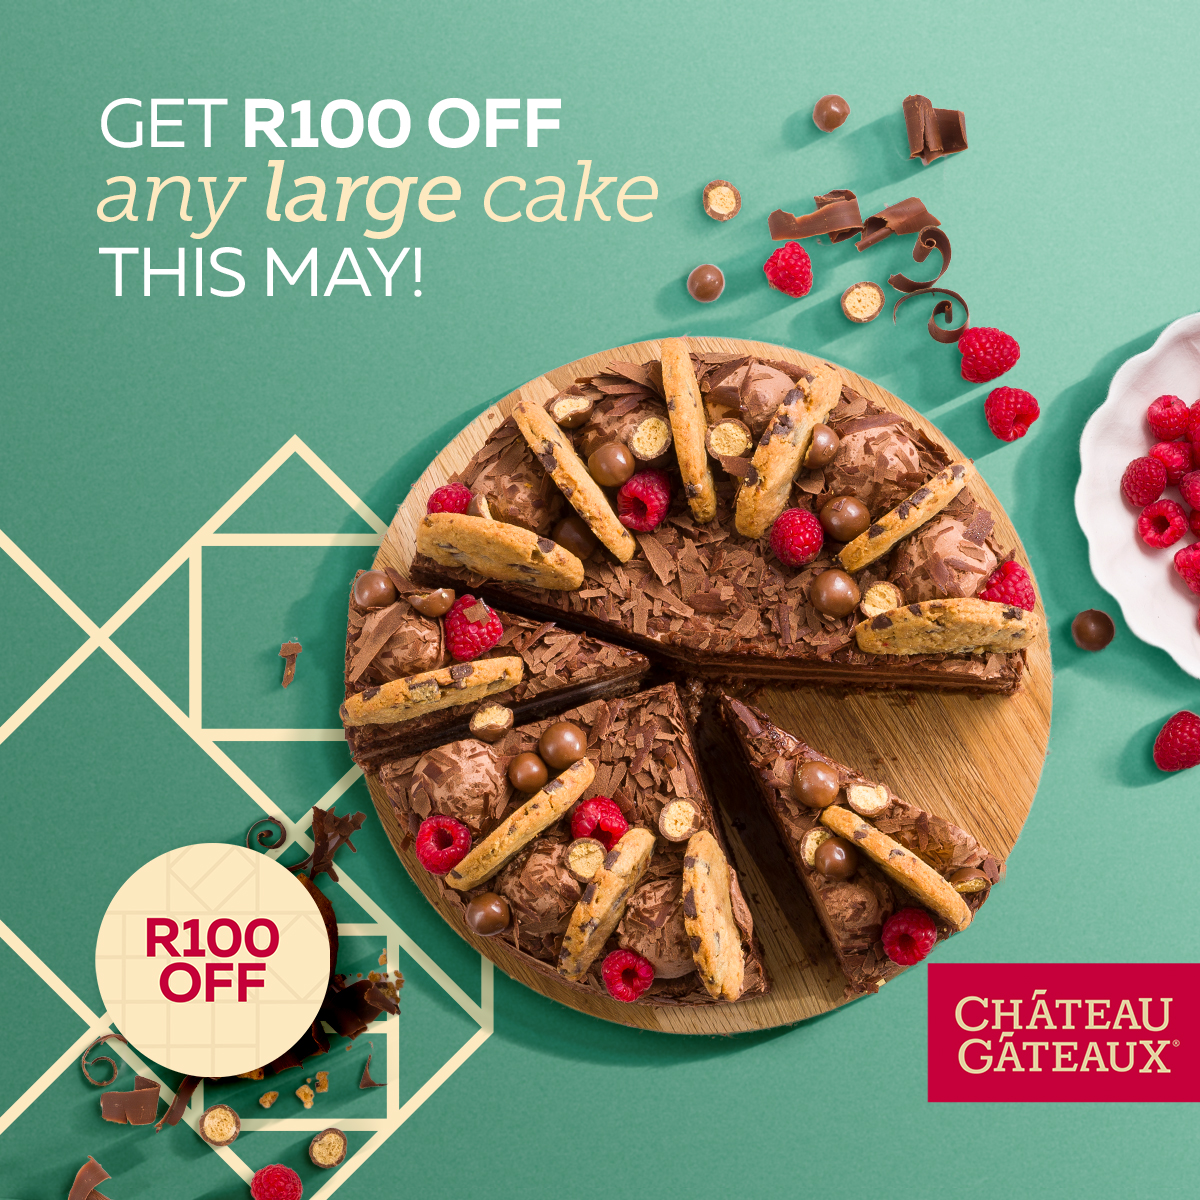 Make Your May Exceptional with Château Gâteaux! 💫
Enjoy R100 off when you purchase any large, handcrafted gourmet cake at our pâtisseries. 🍰
T&Cs Apply
#IconicSandton #MakeYourMomentsExceptional #TheCakePeople